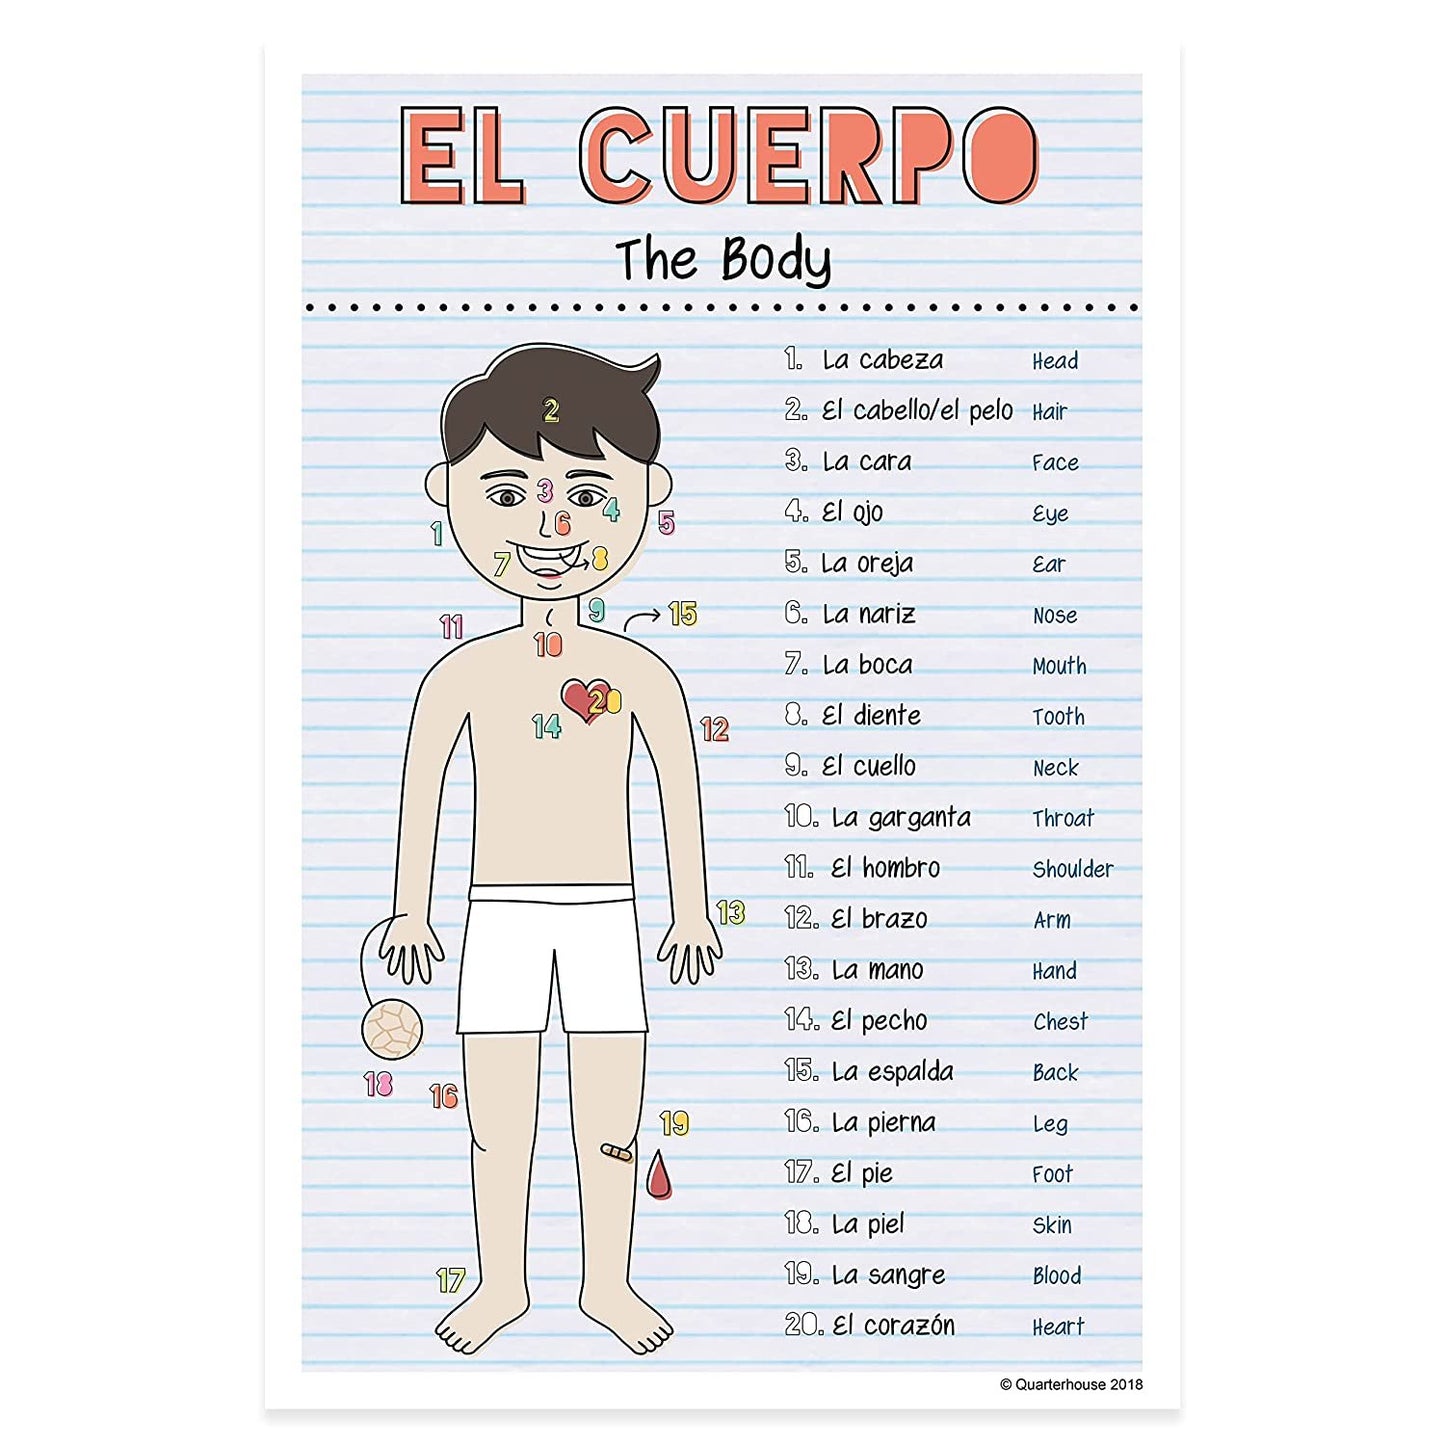 Quarterhouse Spanish Verbs & Beginner Vocabulary (Set F) Poster Set, Spanish Classroom Learning Materials for K-12 Students and Teachers, Set of 11, 12 x 18 Inches, Extra Durable